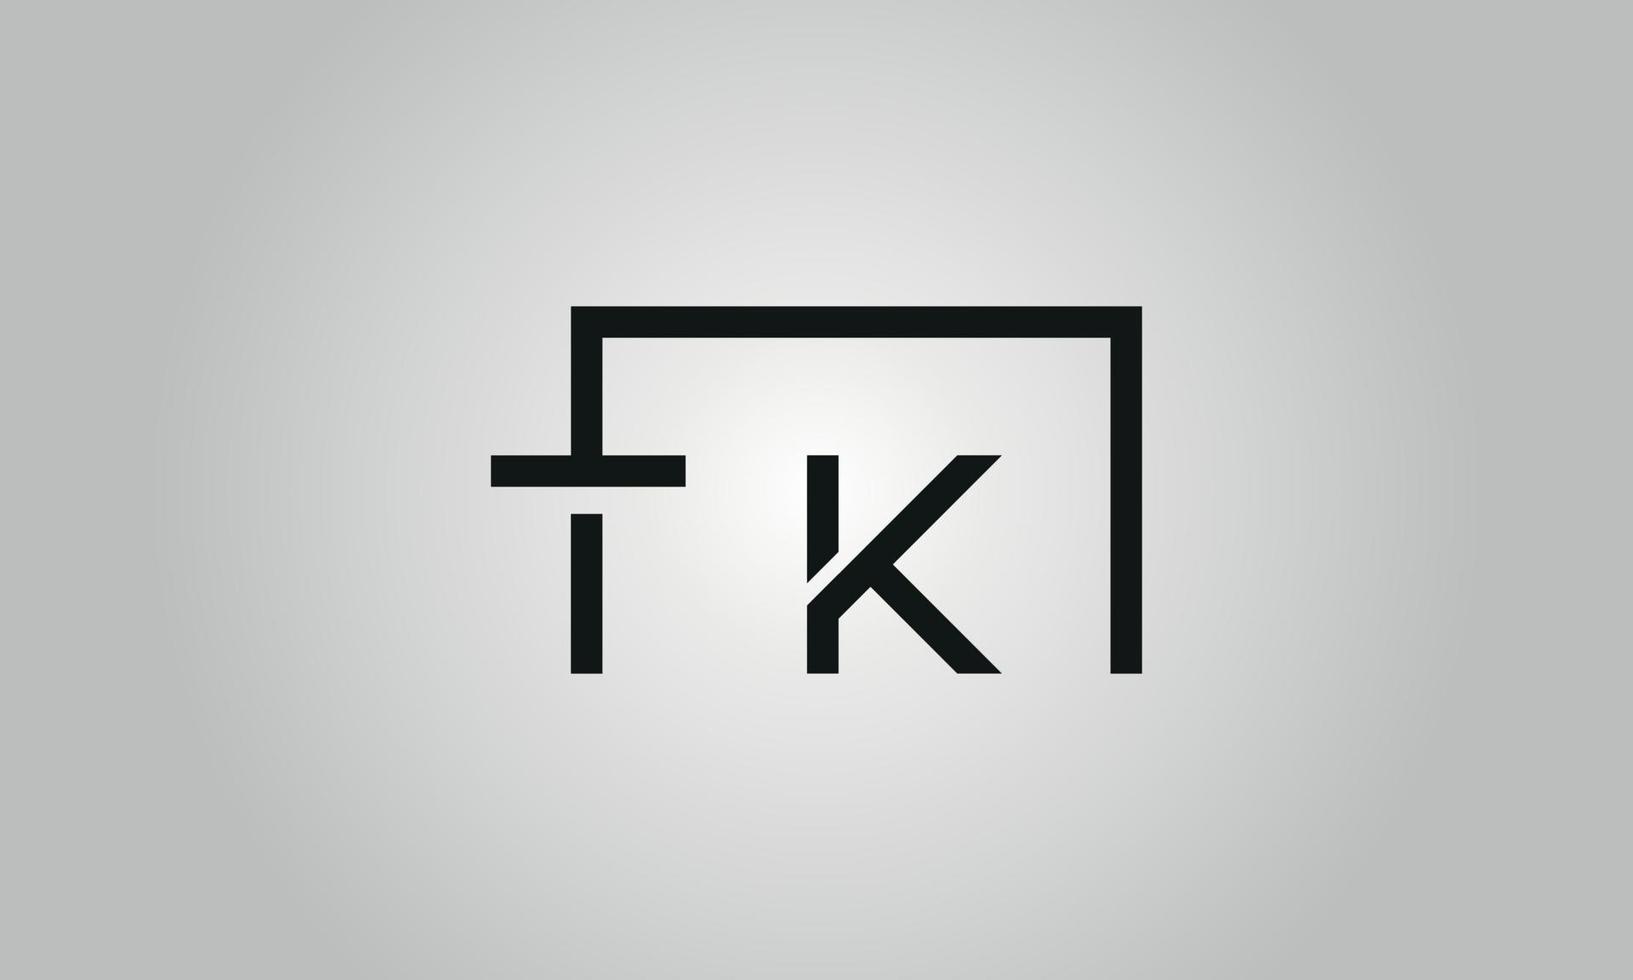 Letter TK logo design. TK logo with square shape in black colors vector free vector template.